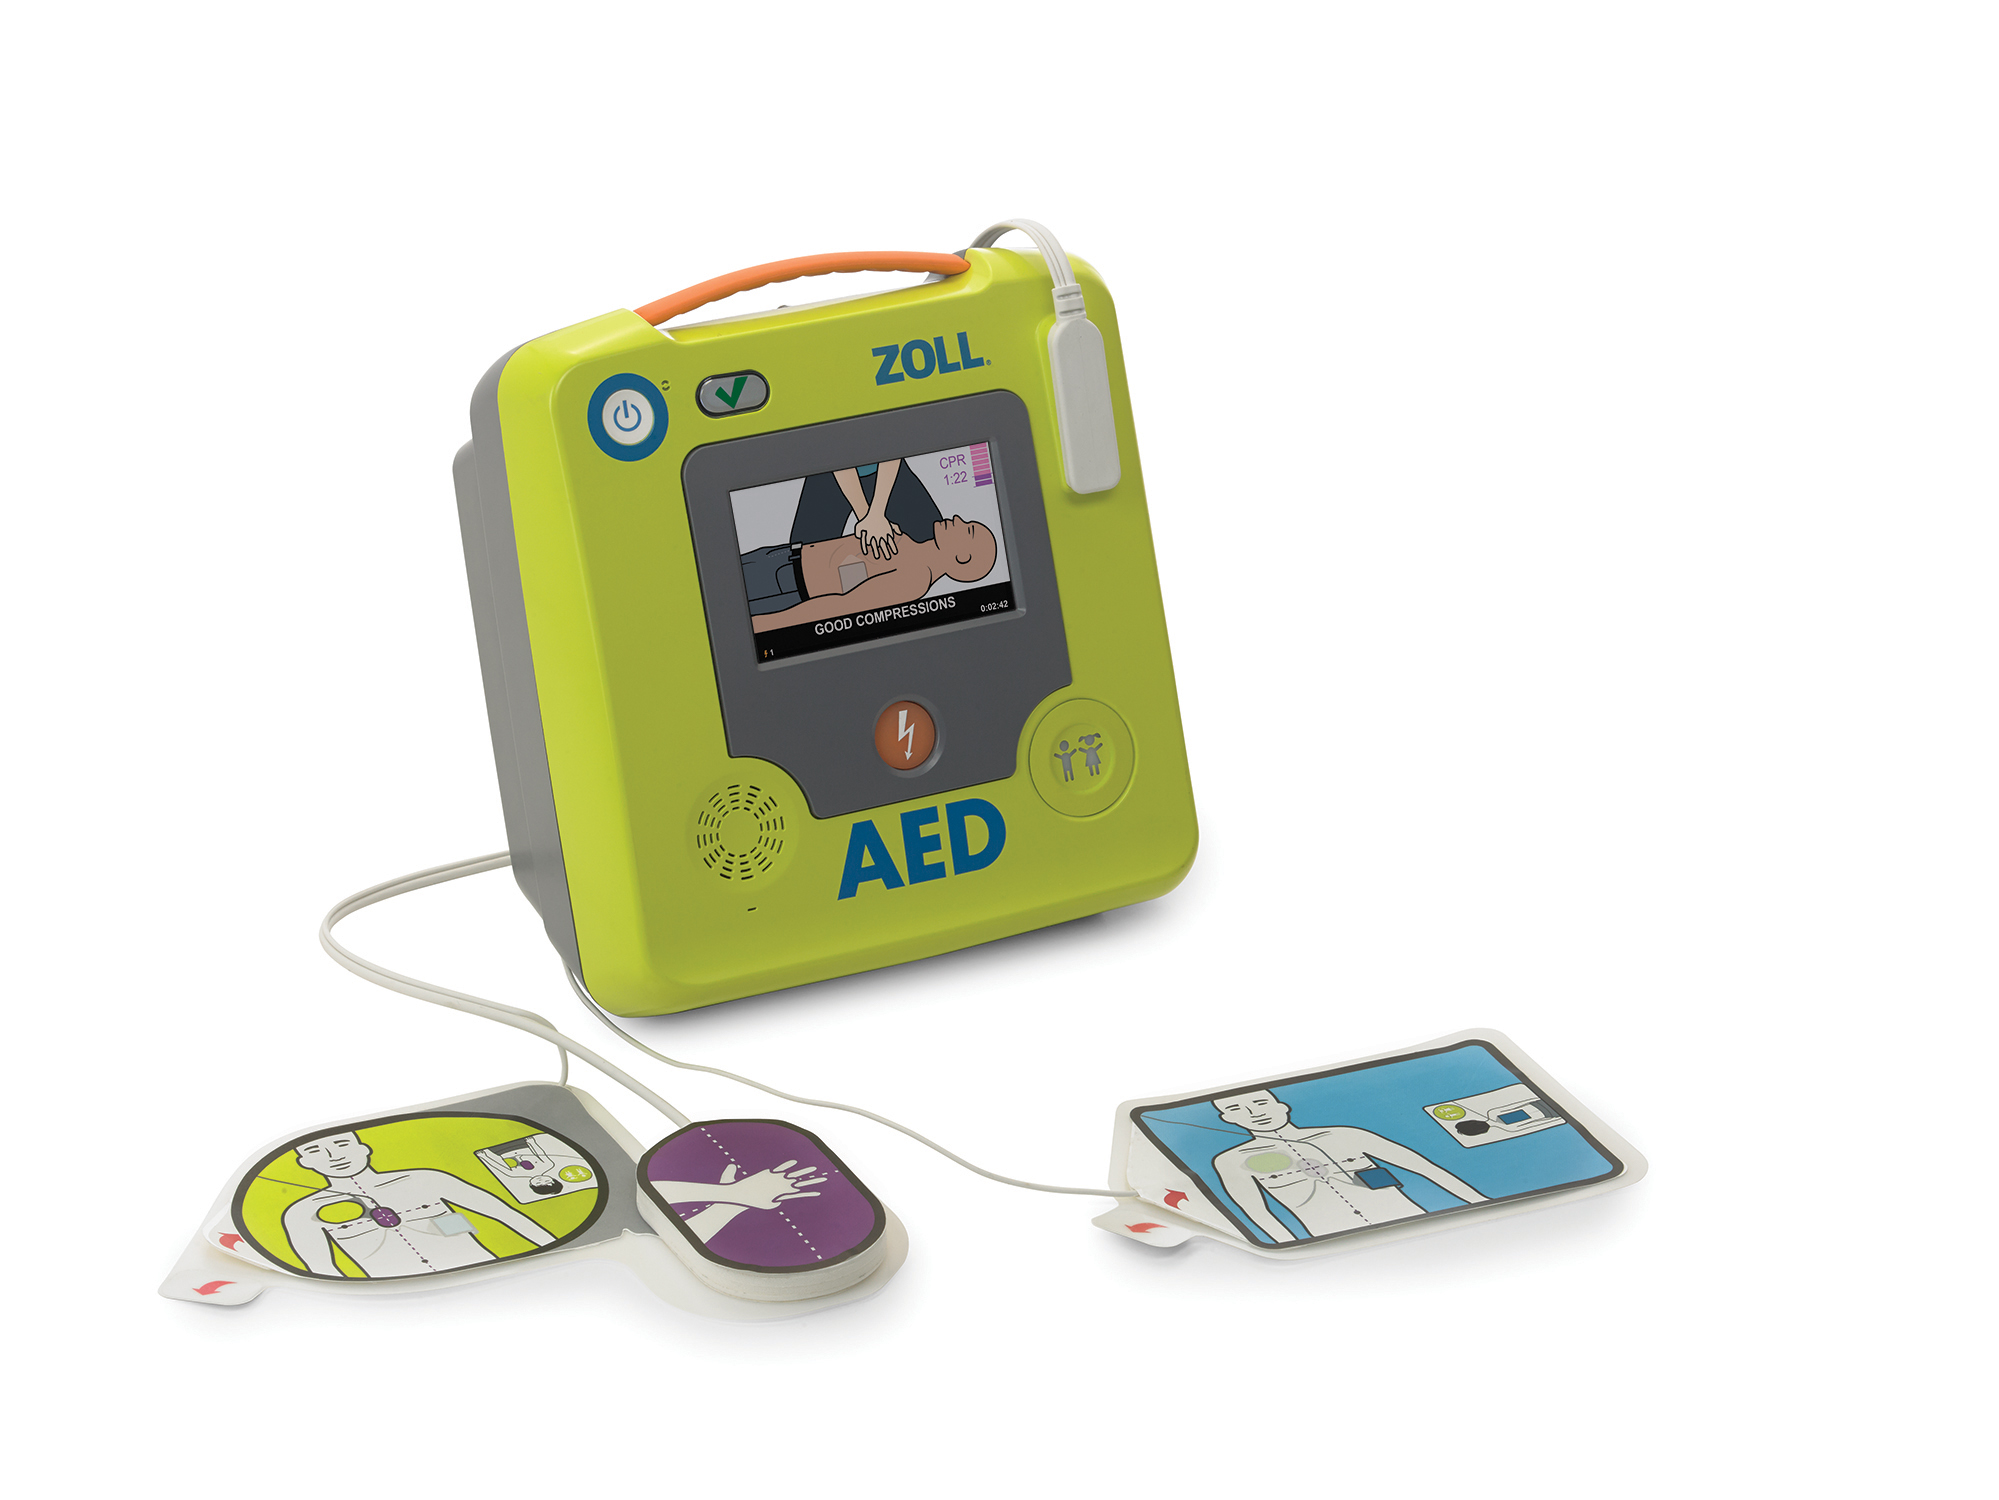 Zoll AED 3 Fully Automatic (EN) for Lay Responders